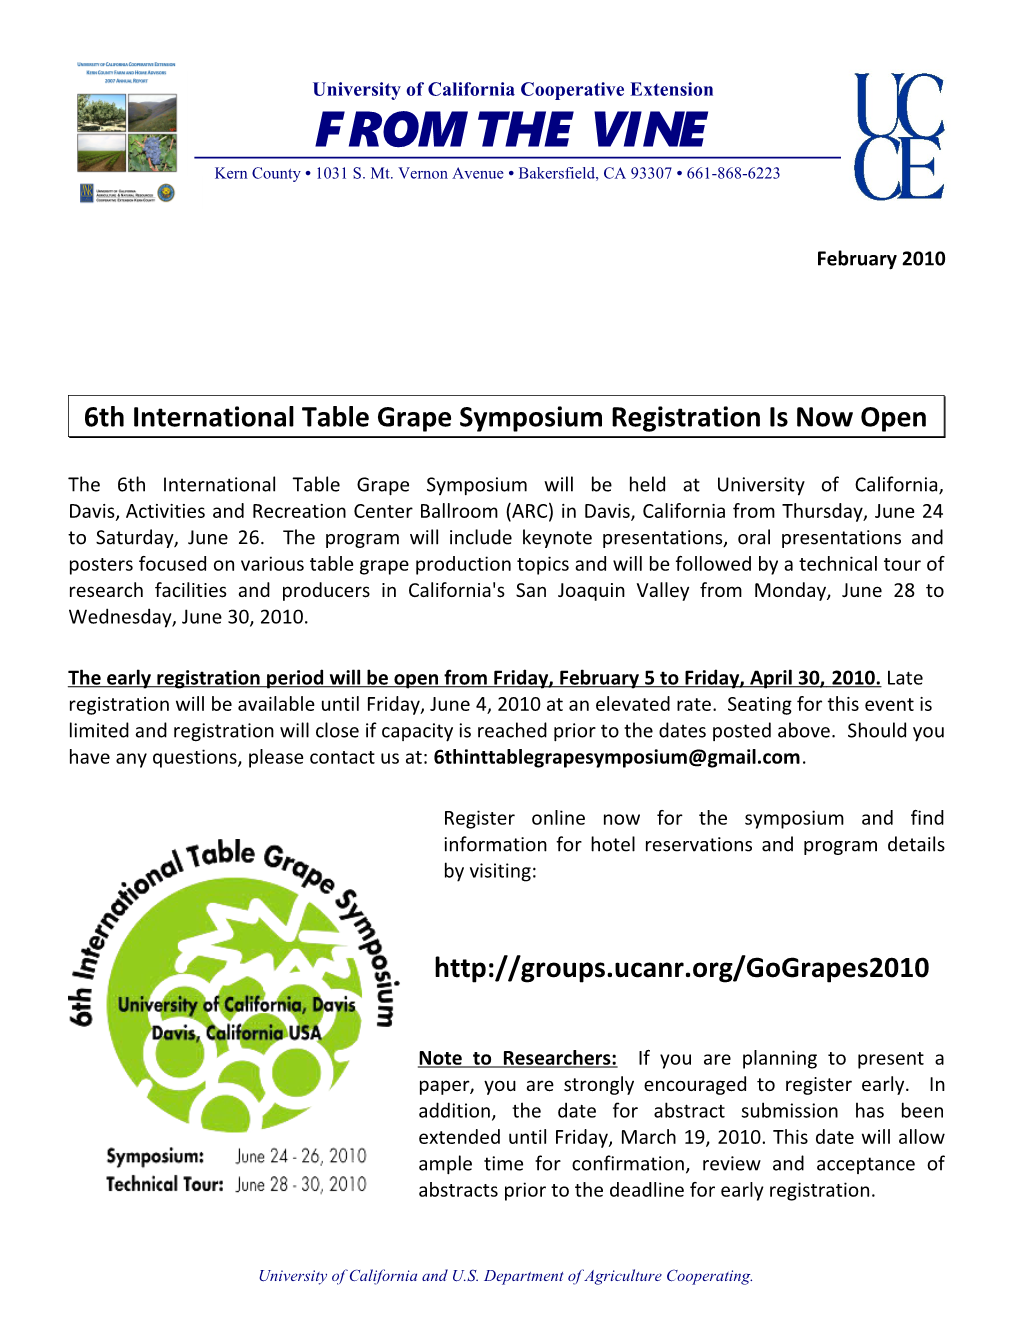 6Th International Table Grape Symposium Registration Is Now Open